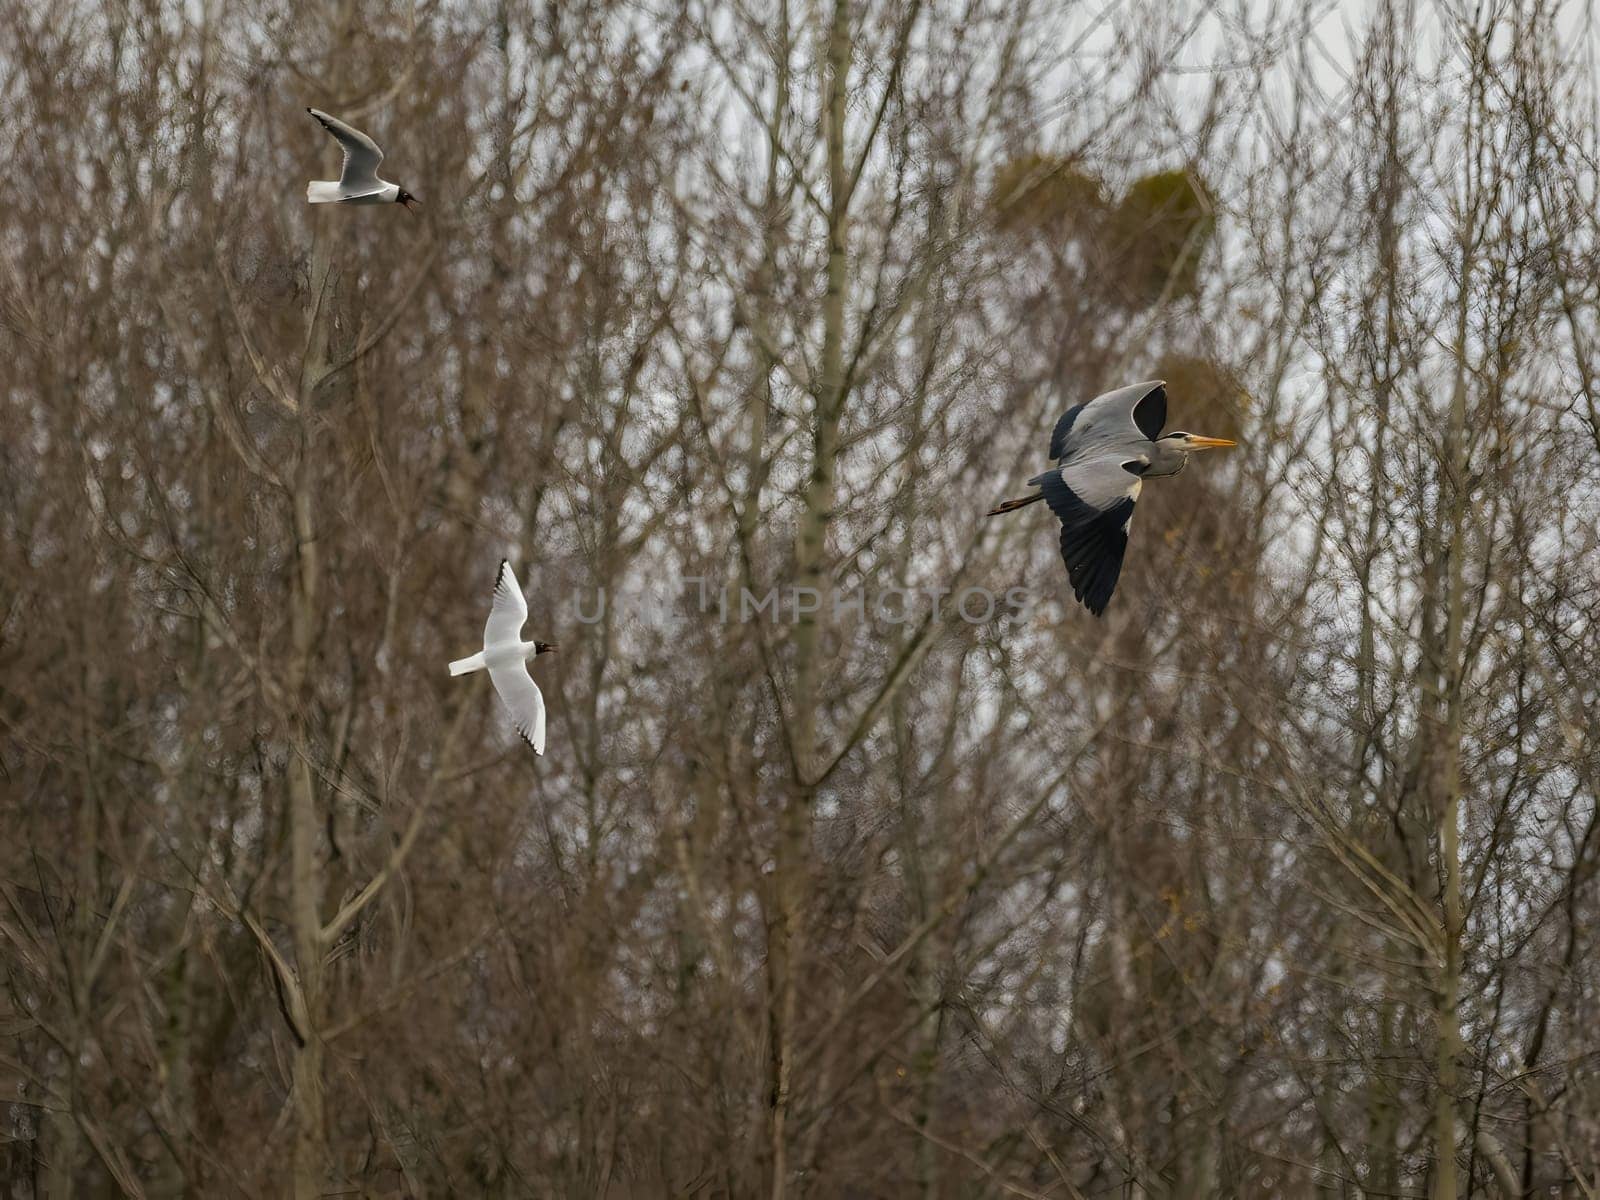 Two black-headed gulls and a gray heron take flight together, each species displaying its unique beauty and grace as they soar through the open sky.